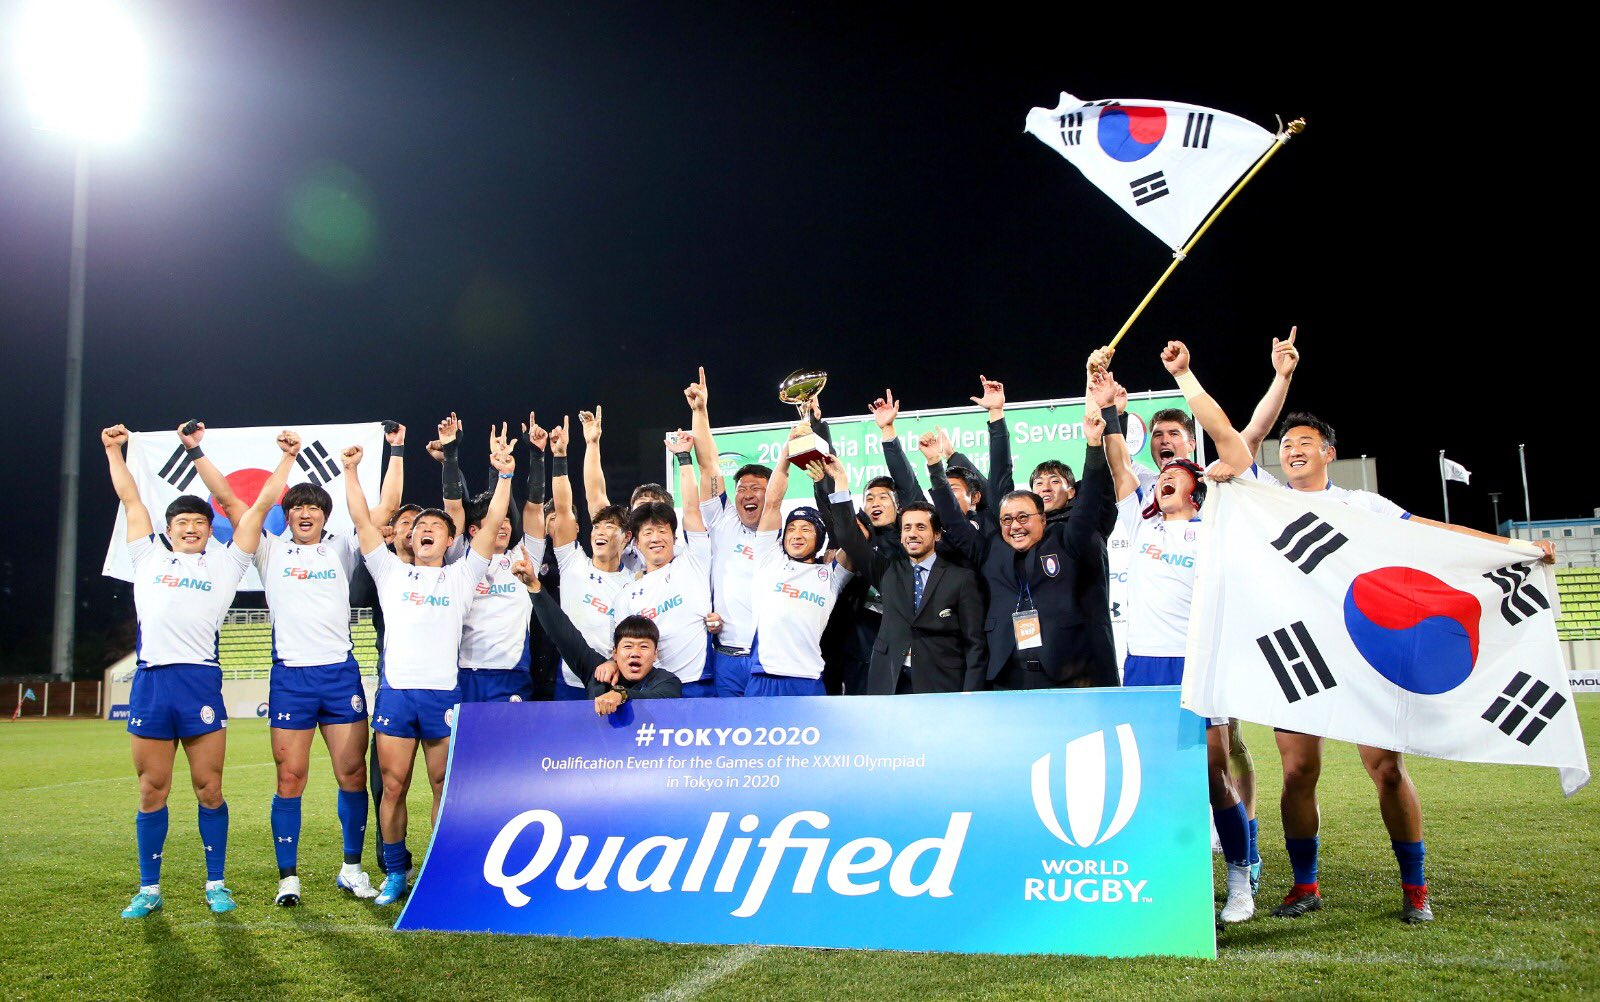 South Korea surprised Hong Kong to qualify for Tokyo 2020 at the Asian Olympic qualifier in Incheon ©Asia Rugby